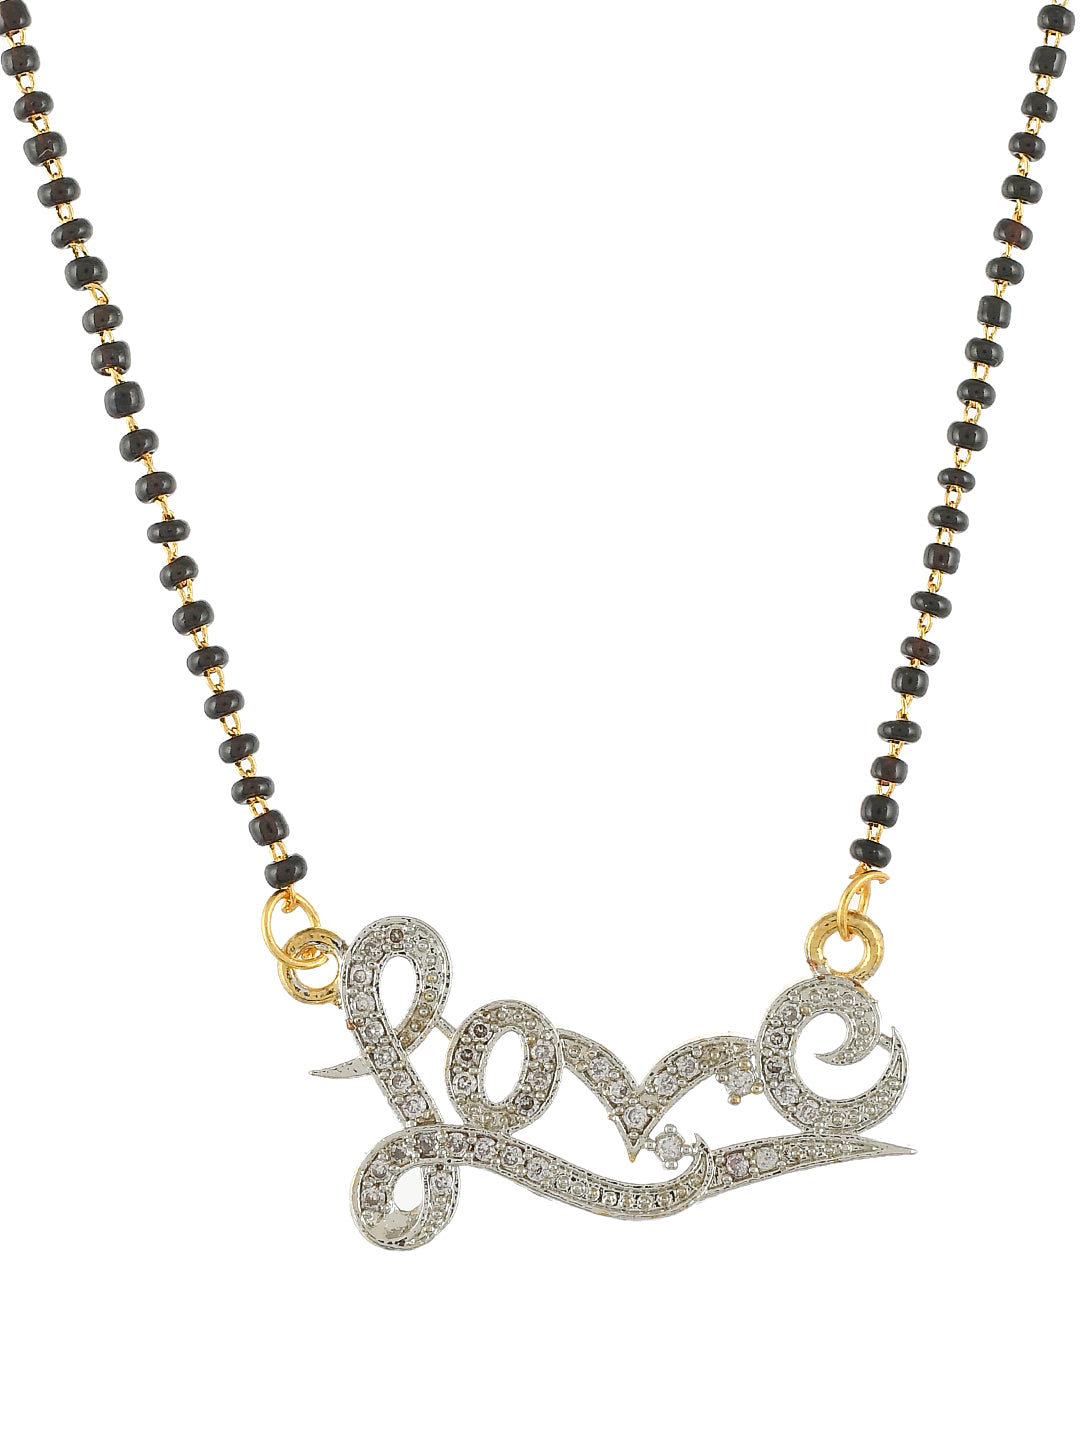 American Daimond Love Mangalsutra With Heart Earrings